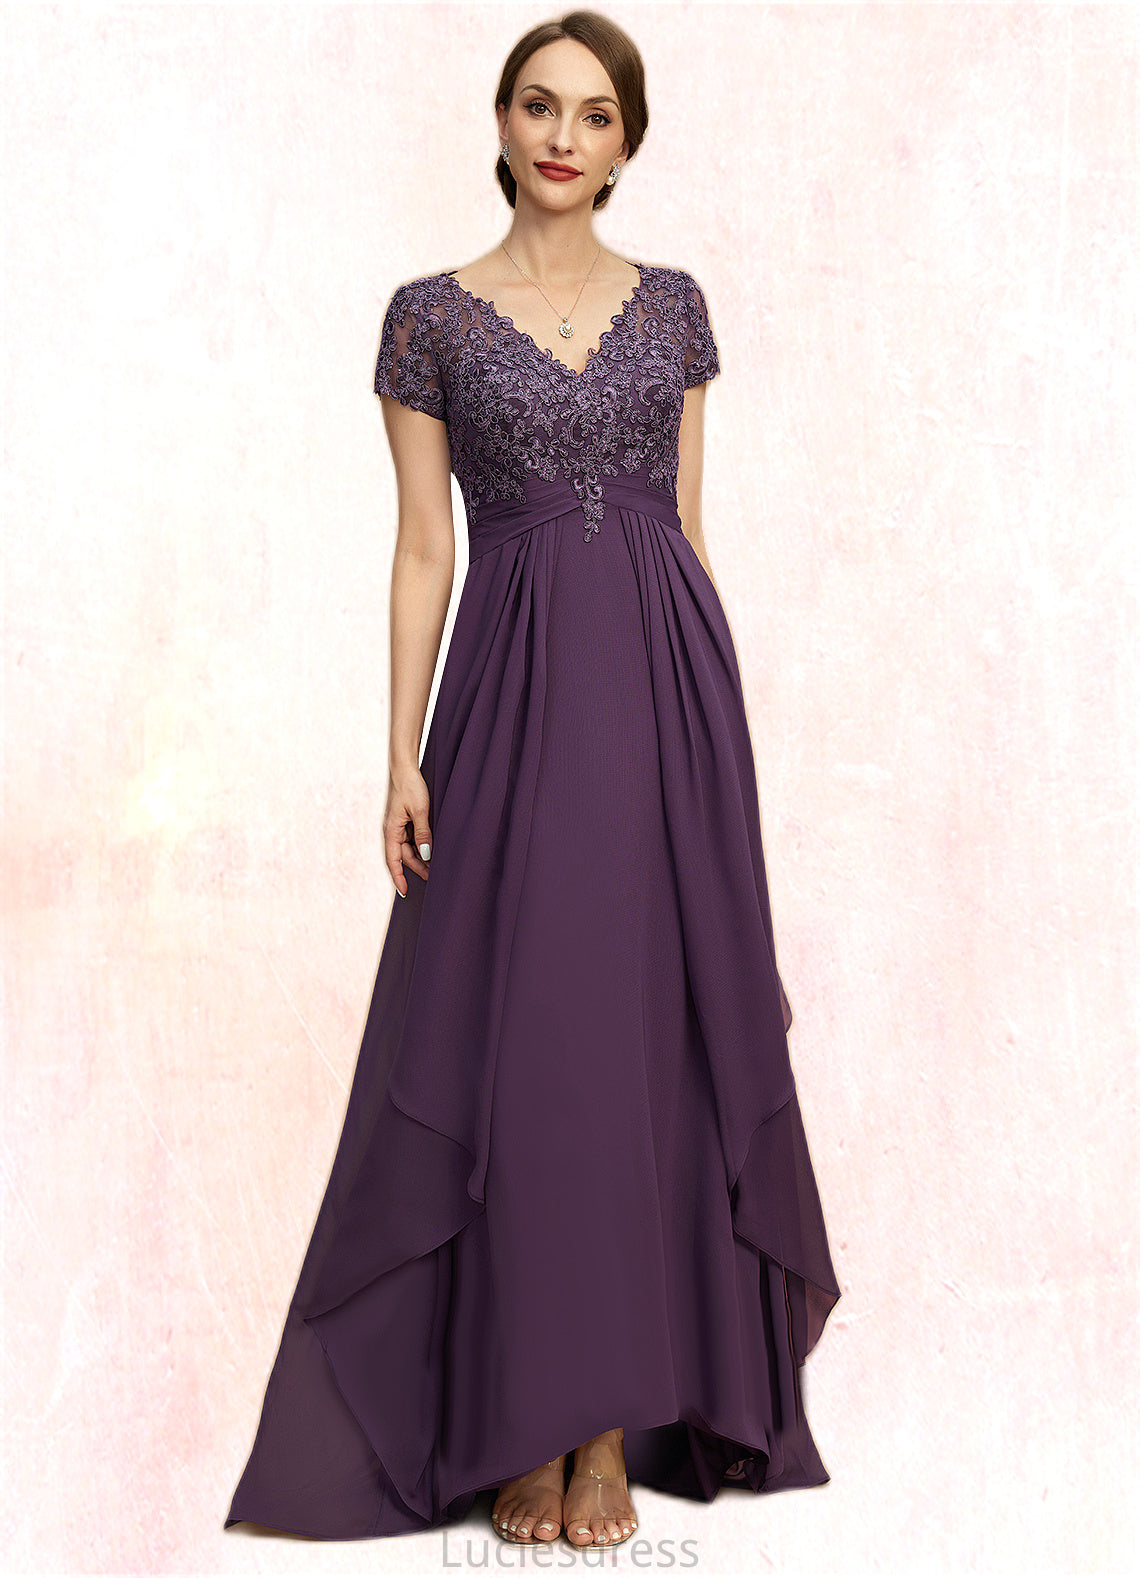 Genevieve A-line V-Neck Asymmetrical Chiffon Lace Mother of the Bride Dress With Cascading Ruffles HFP0021899